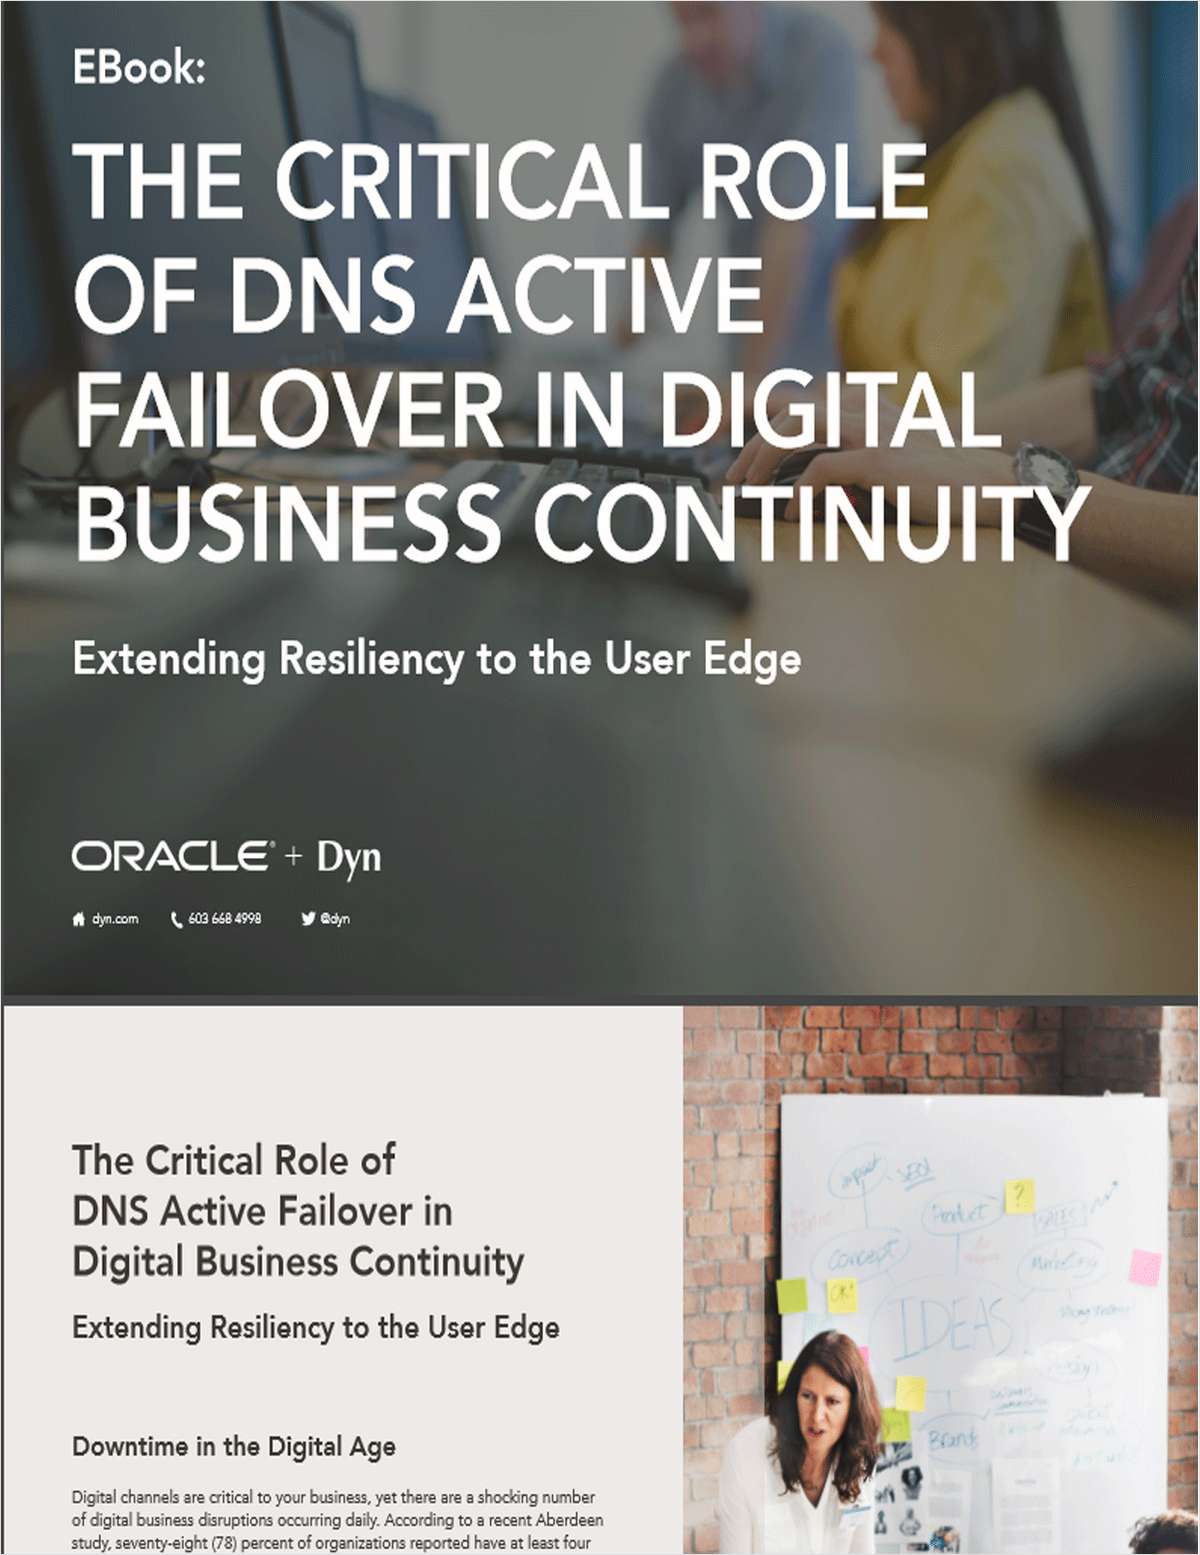 Role of DNS Active Failover in Digital Business Continuity